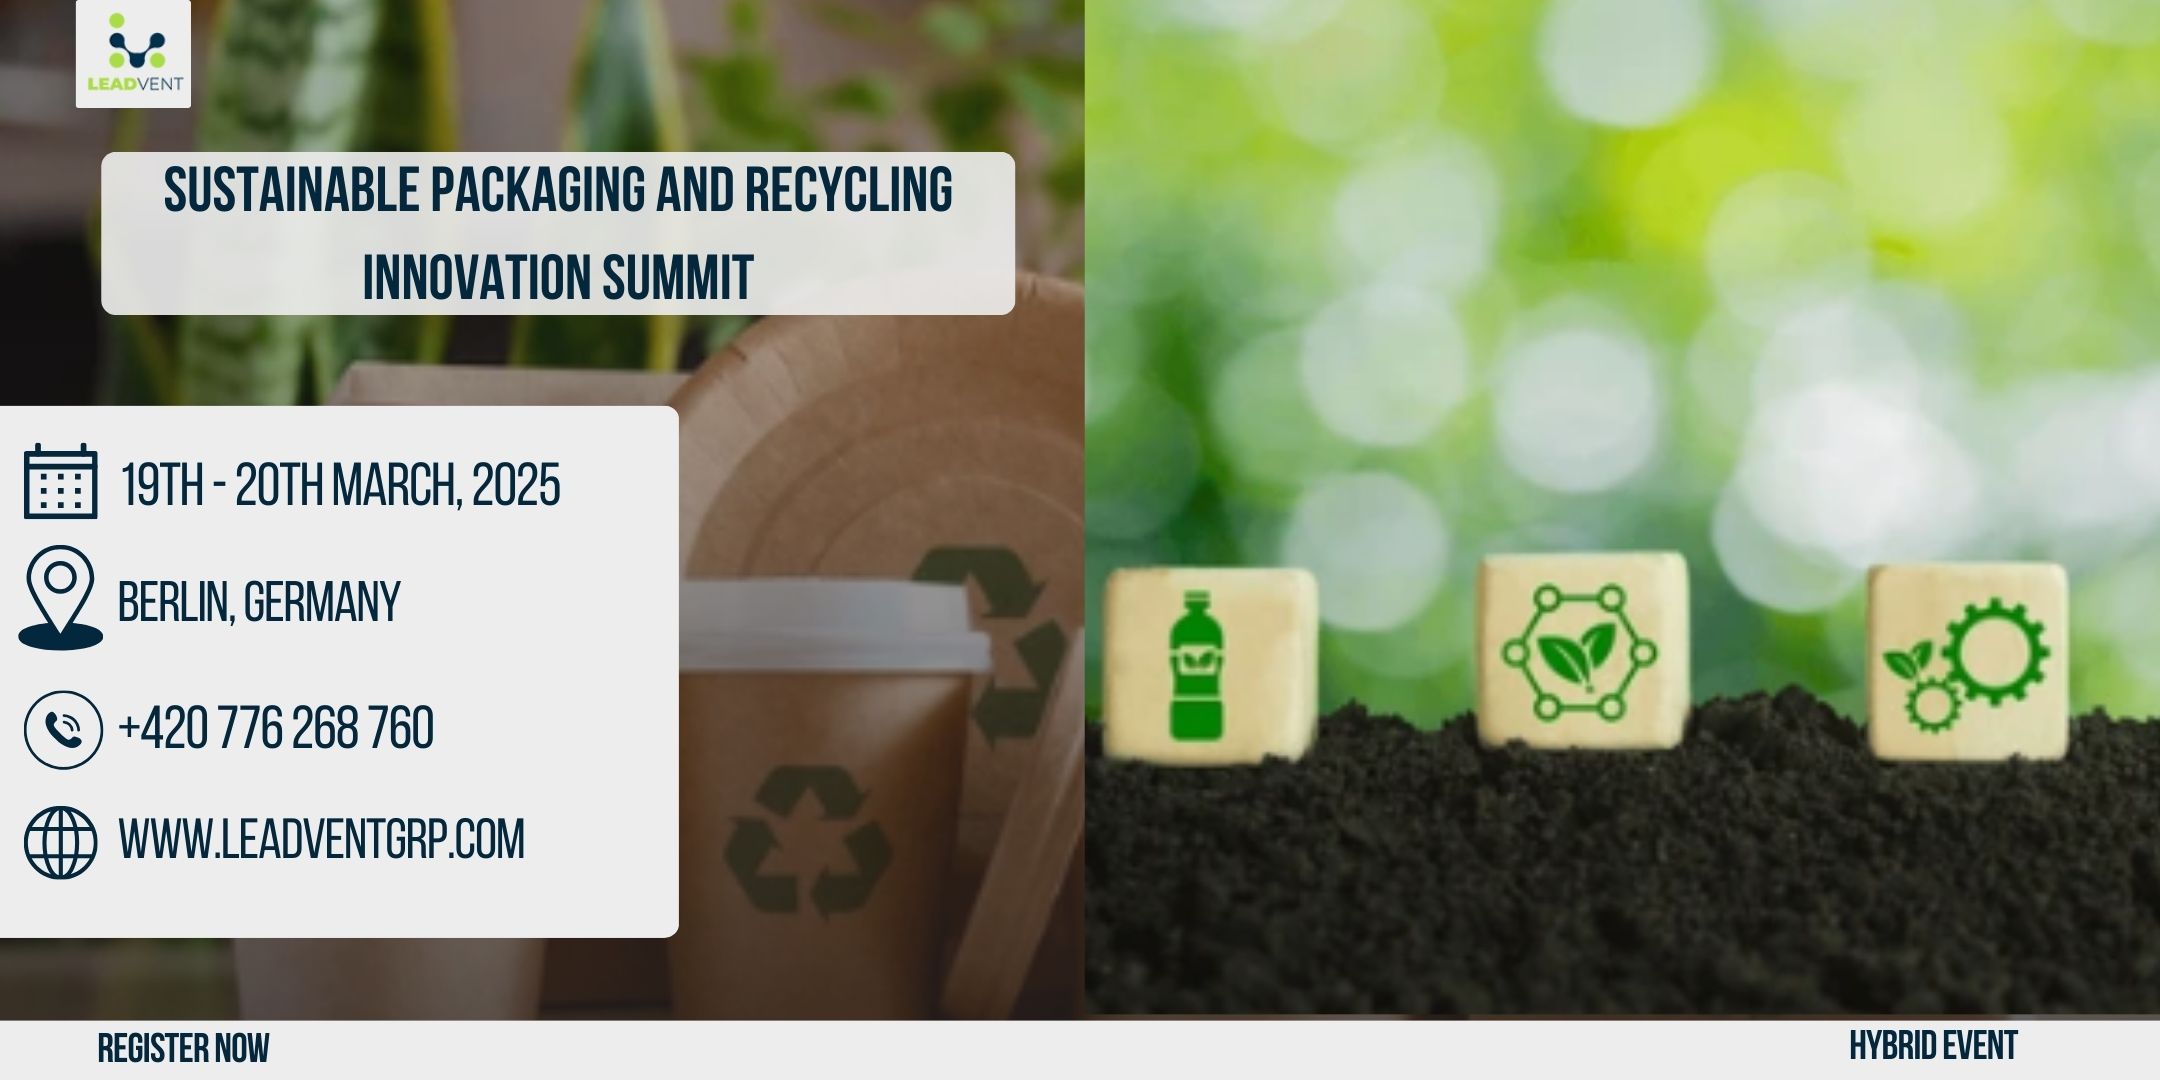 Sustainable Packaging And Recycling Innovation Summit organized by Leadvent Group